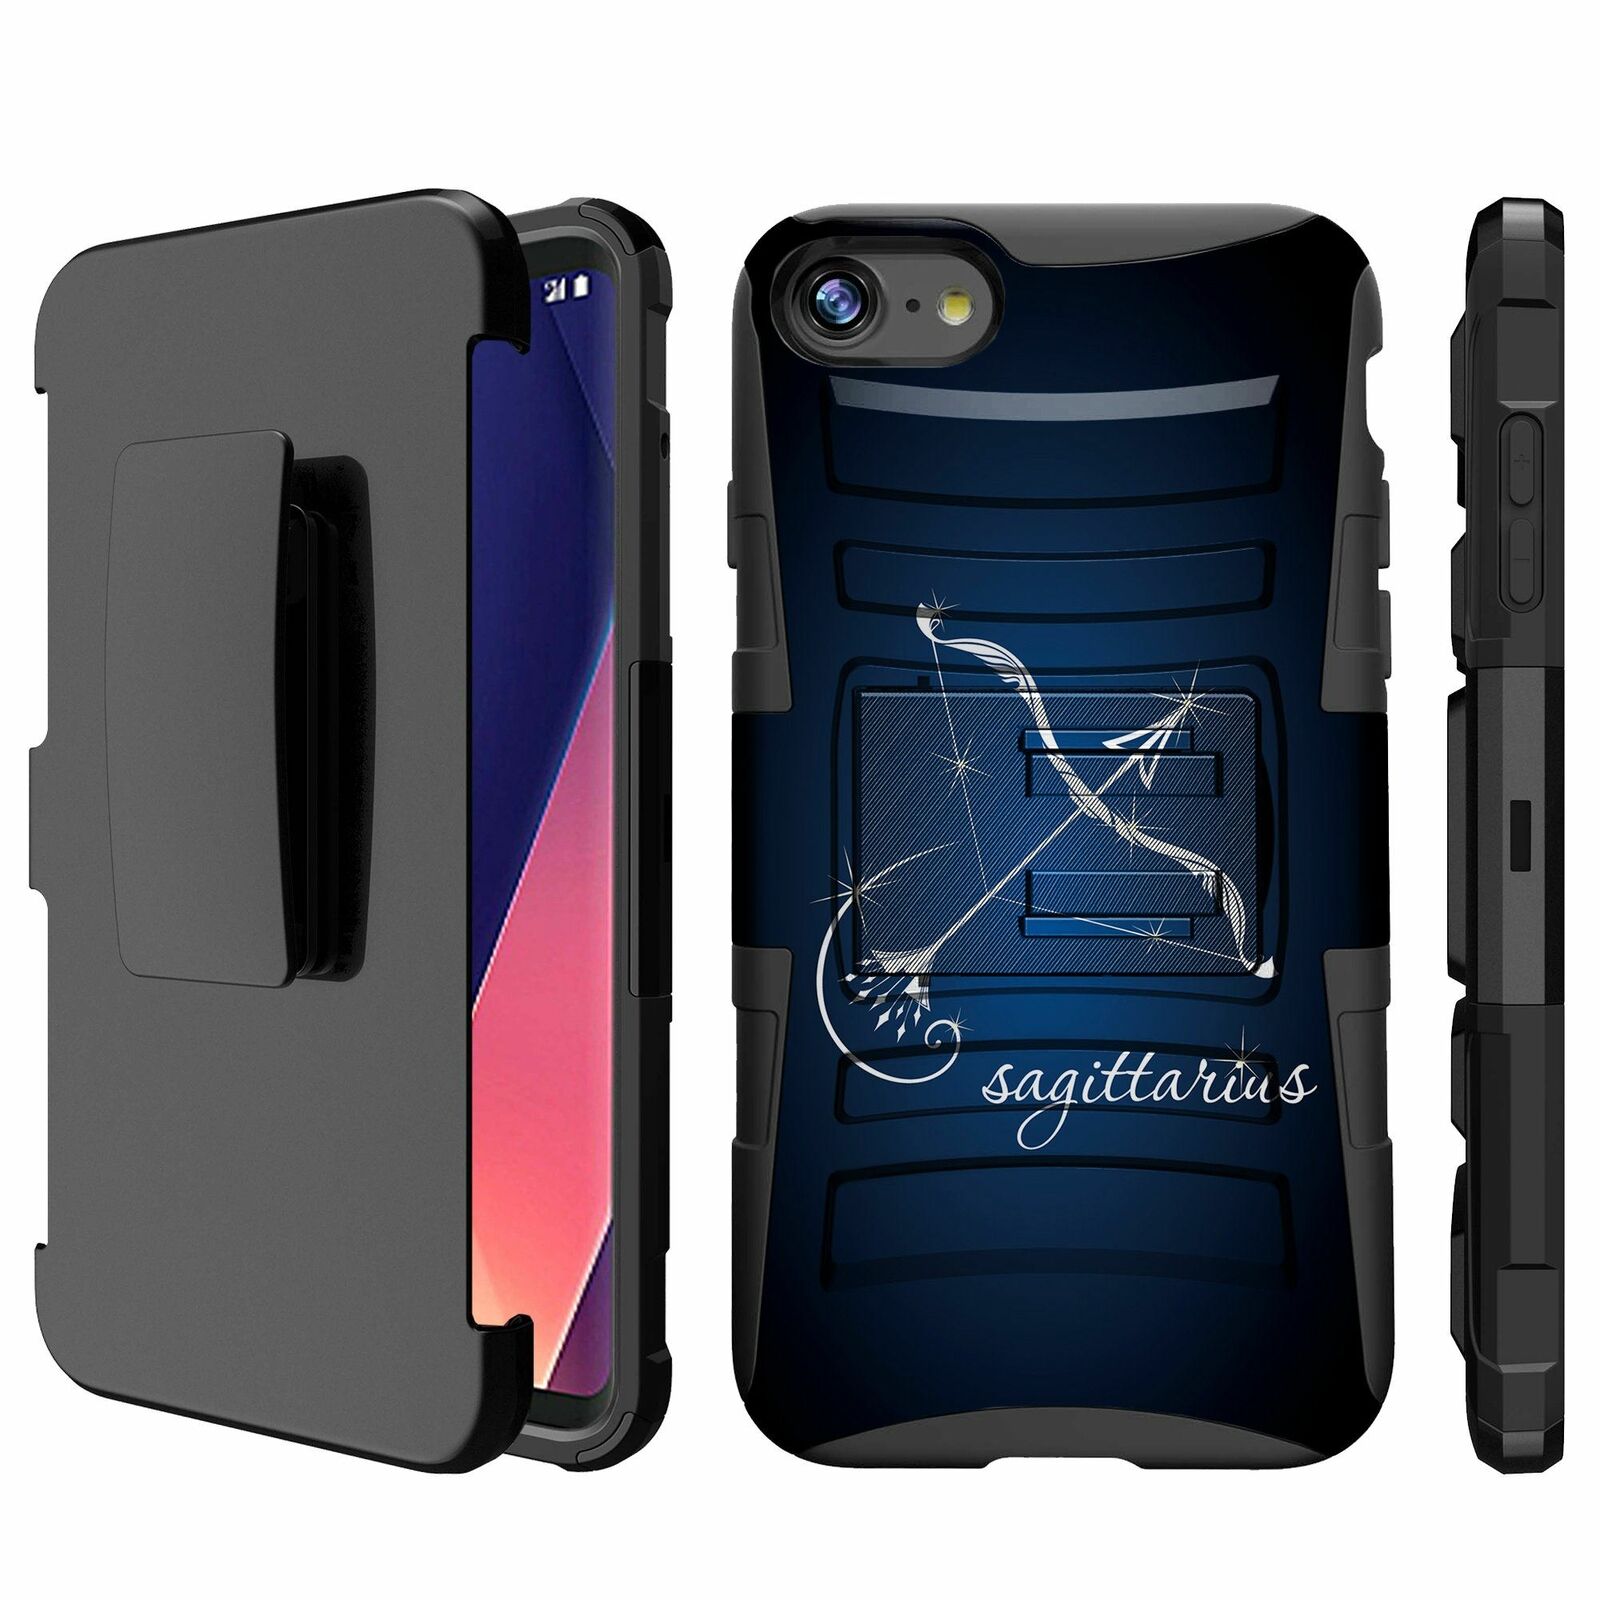 For Apple iPhone 8 | iPhone 8 2017 Holster & Kickstand Combo Case-Zodiac Signs iPhone Cases AtlasCase Sagittarius 